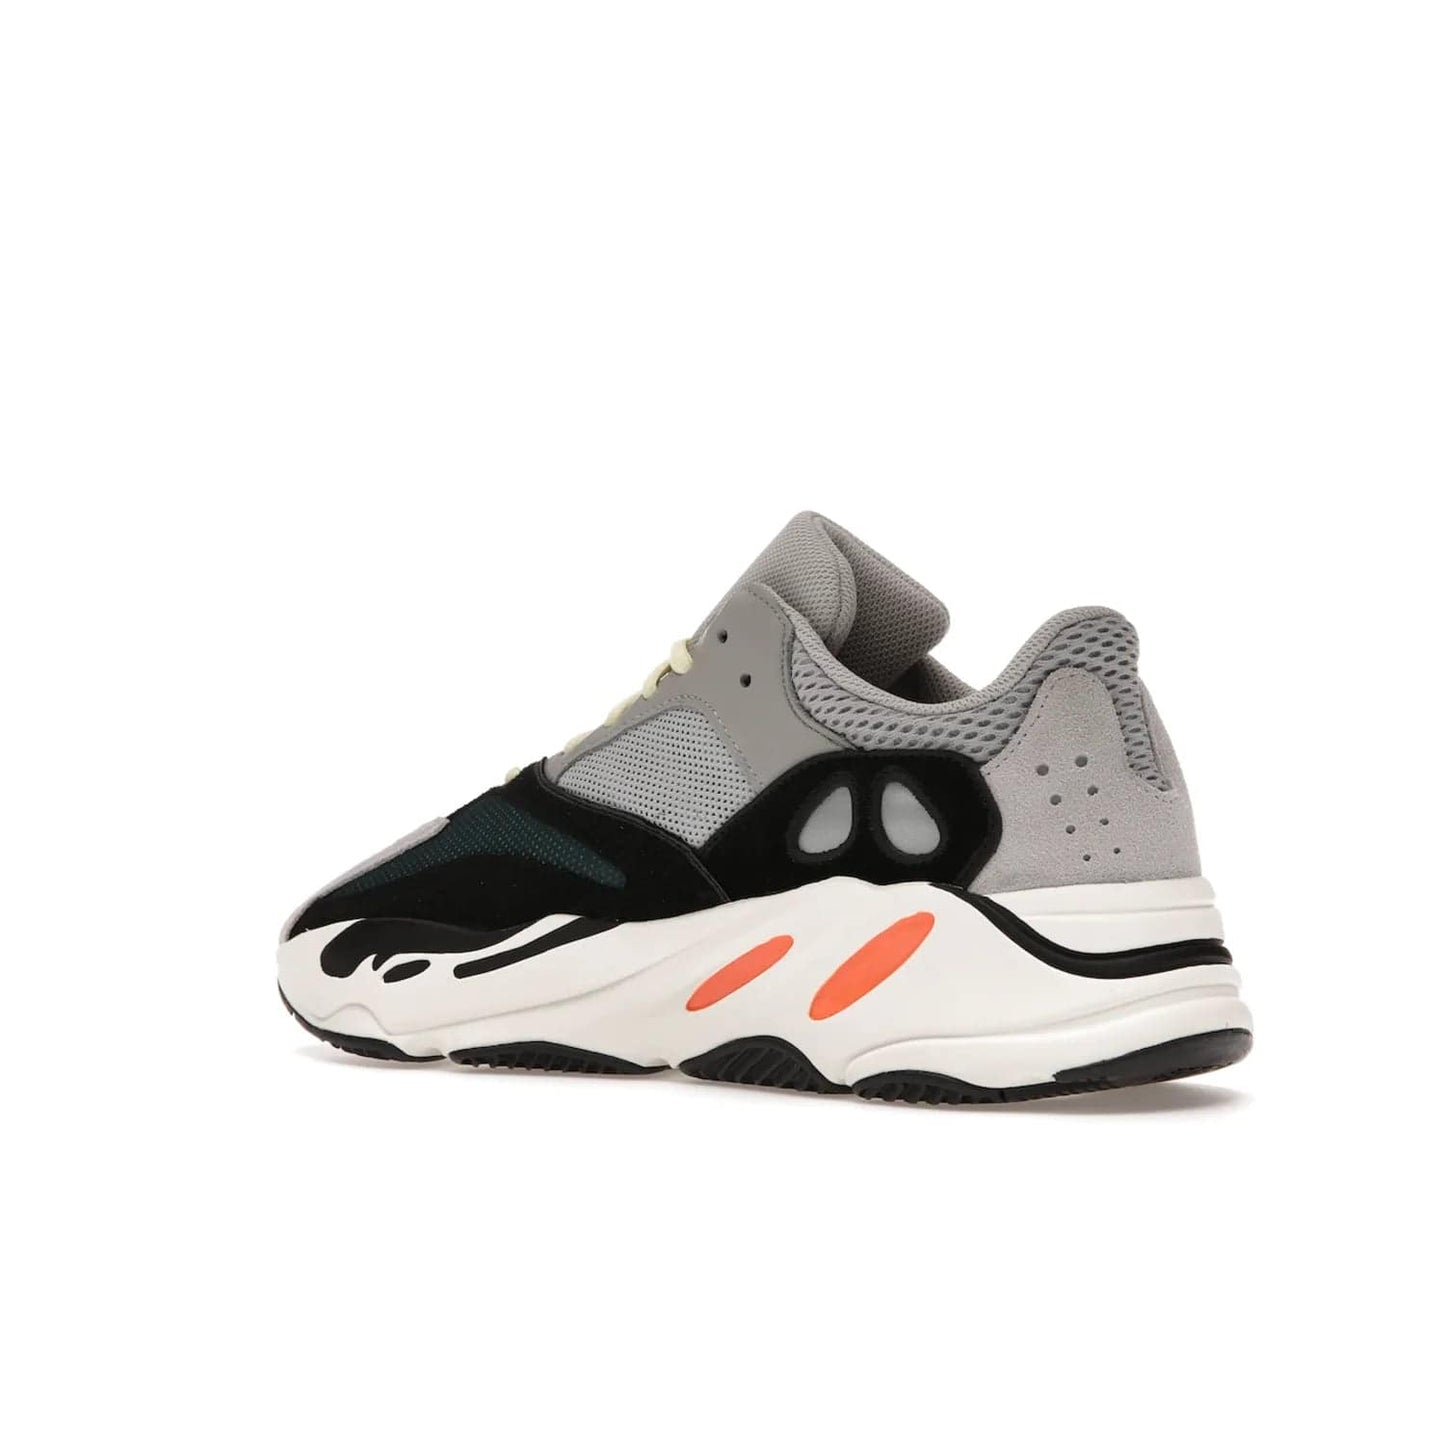 adidas Yeezy Boost 700 Wave Runner - Image 23 - Only at www.BallersClubKickz.com - Shop the iconic adidas Yeezy Boost 700 Wave Runner. Featuring grey mesh and leather upper, black suede overlays, teal mesh underlays, and signature Boost sole. Be bold & make a statement.